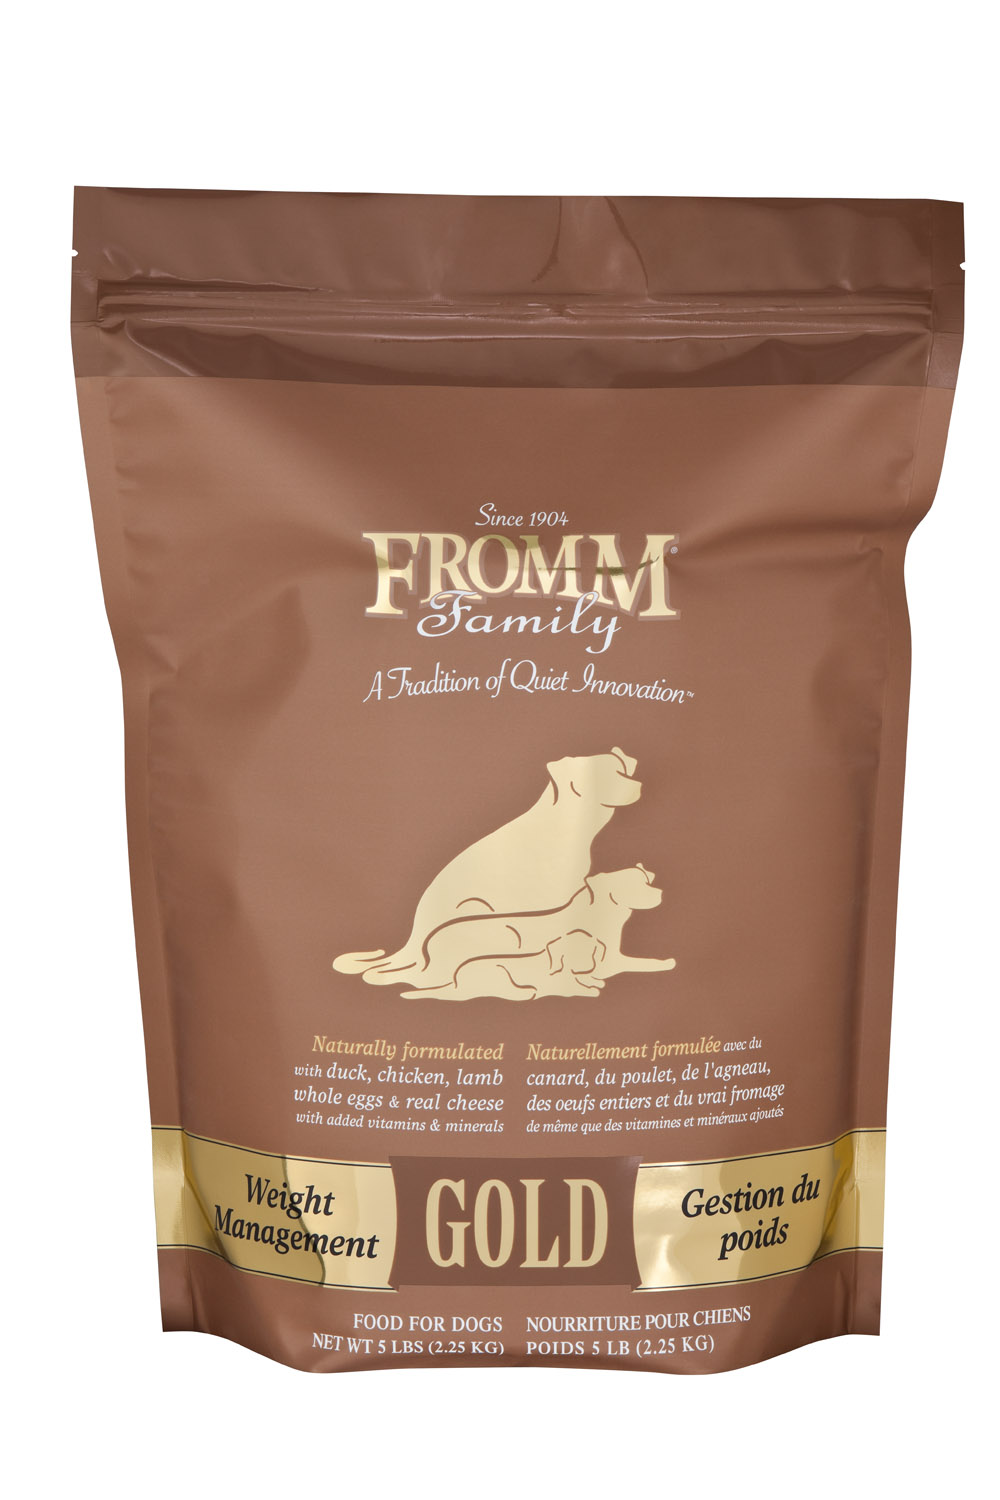 Fromm Family Weight Management Gold Food for Dogs, 5 lbs